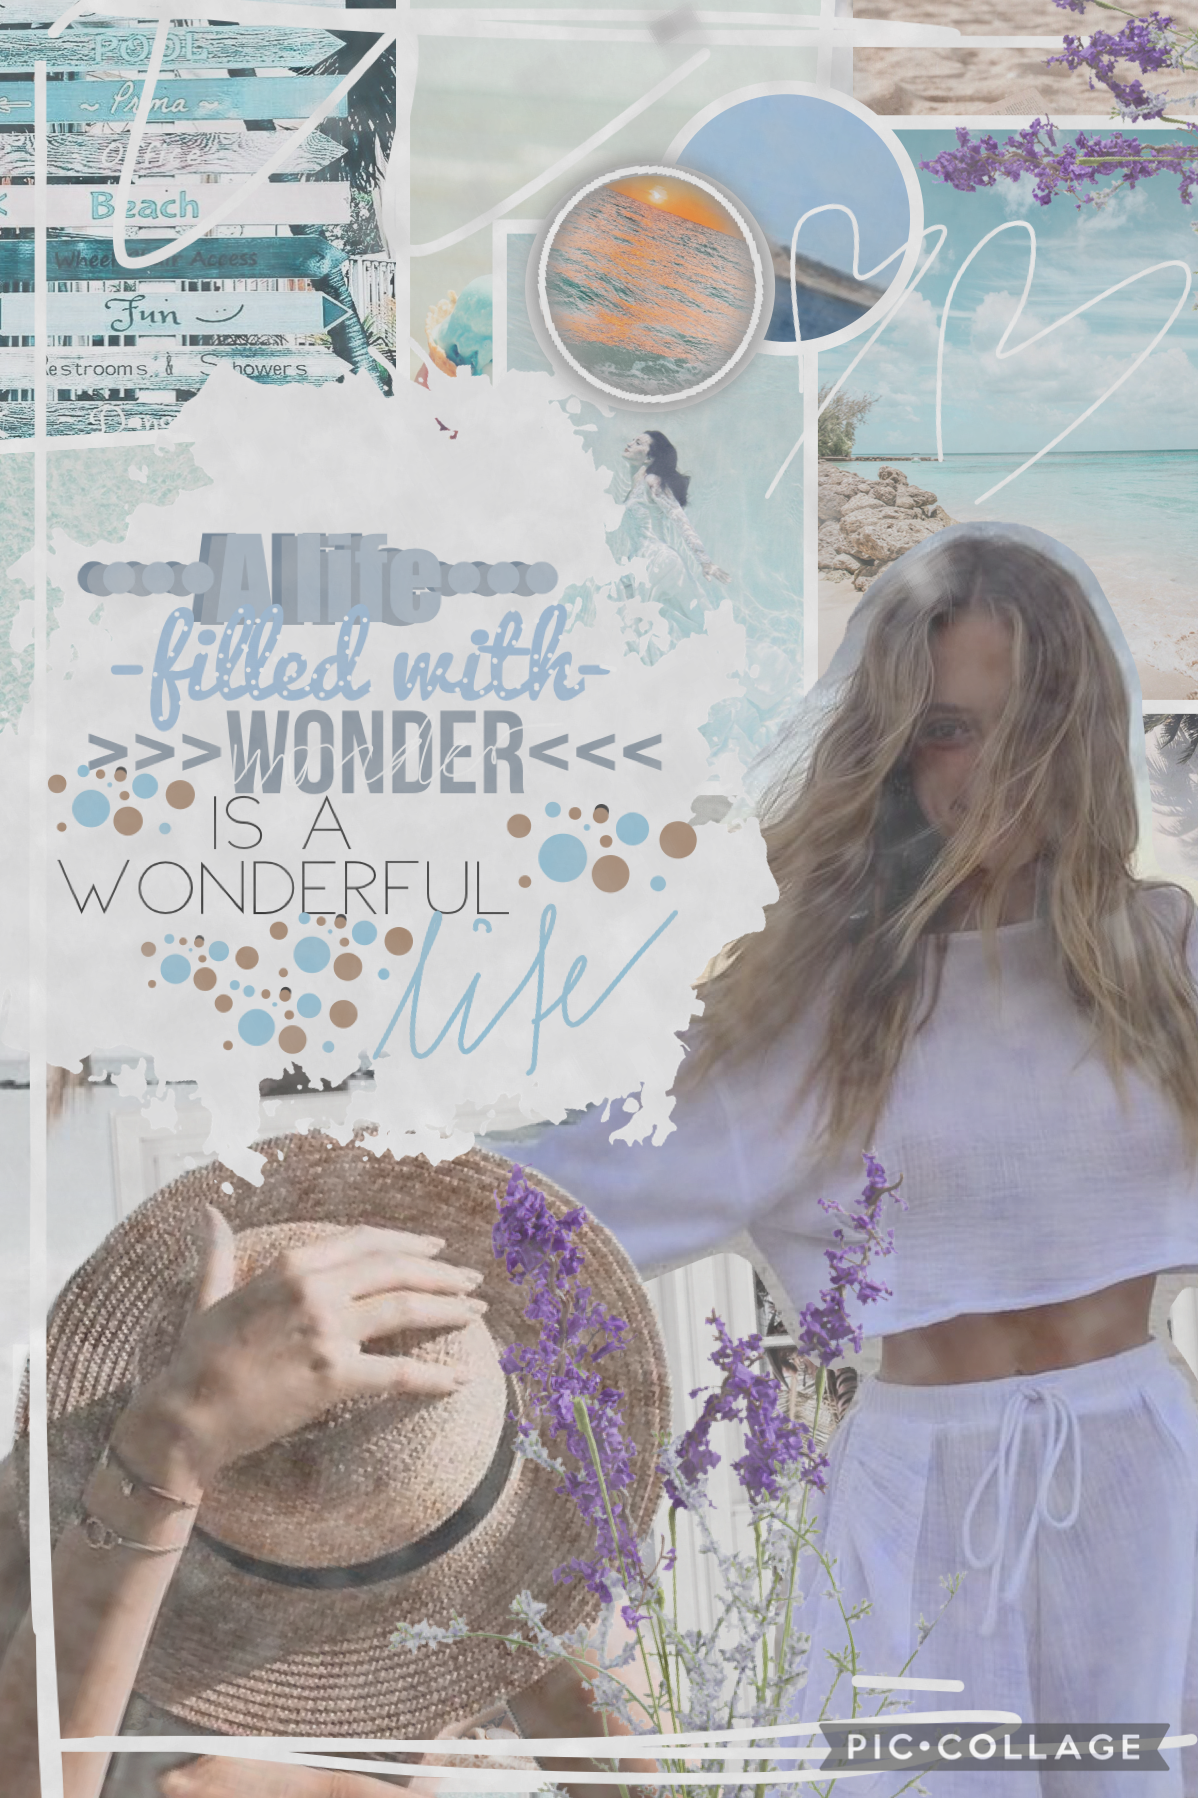 •21•06•23•
Hey! This is my entry to @its-brianna’s contest! On my first post I said that I’ll reveal my main at 300 follower, but some collager guessed right so I want to tell you now: it’s @summer-whispers! 🫶🏻